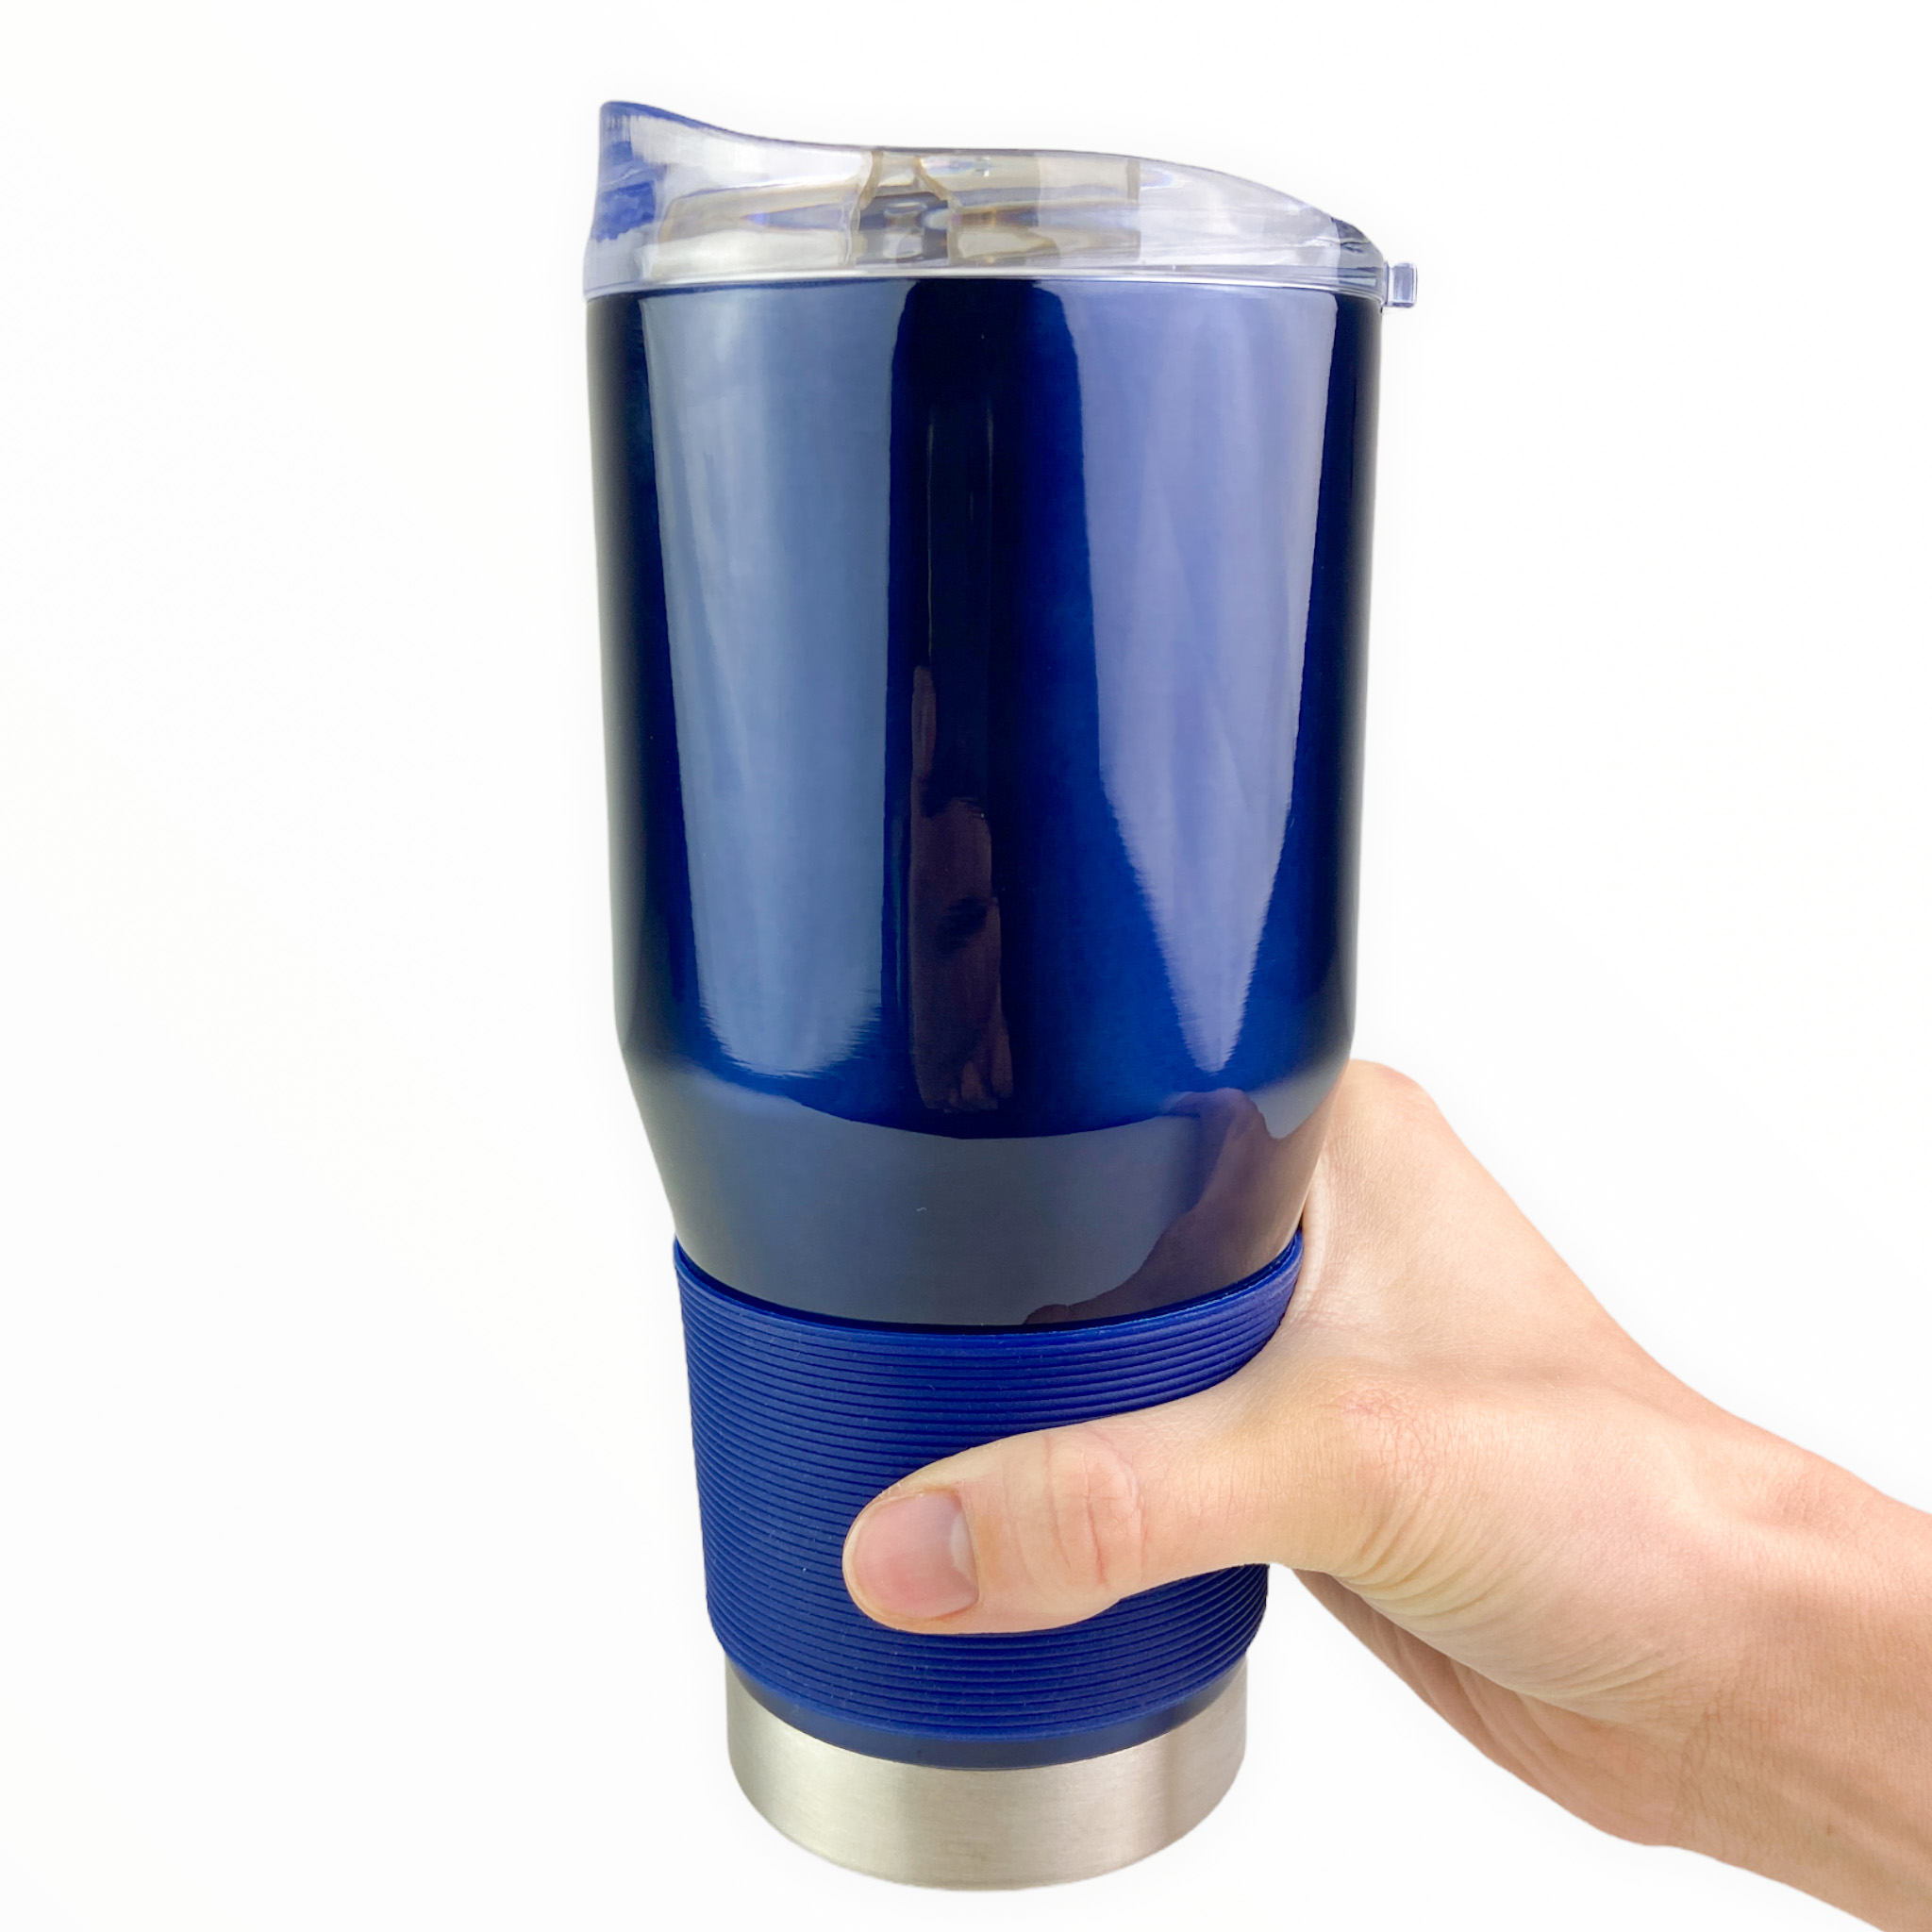 3 Pack of Double Walled Vacuum Insulated Stainless Steel Tumblers With Slide Lids and Silicone Grip - Keeps your drinks ICE, ICE COLD for hours and hours and hours, just like the Yeti brand! These sell for $25 EACH in stores, but you're getting THREE for less than that @ only $7.99 each! - Incredibly deal because you will receive a random color from white, blue etc (no pink or purple) - Order 2 or more 3-packs and SHIPPING IS FREE!